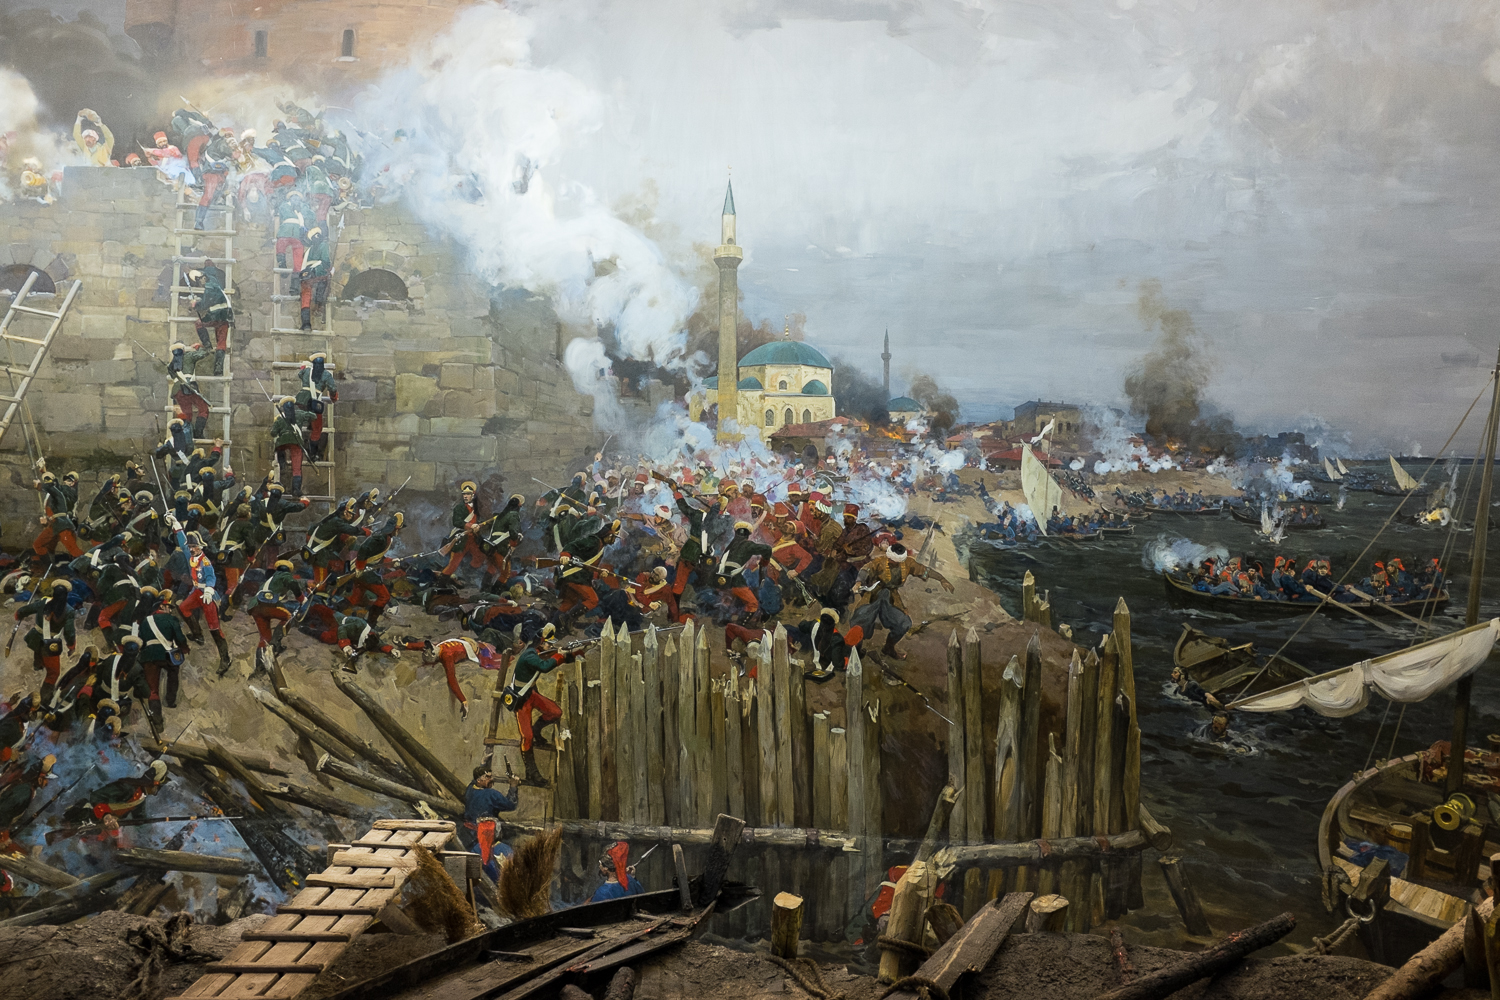  Izmail. Detail of a panorama in a museum&nbsp;depicting the Russian assault&nbsp;on the town, led by Prince Grigori Potemkin and General Aleksander Suvorov,&nbsp;during the Russo-Turkish war in 1788. 